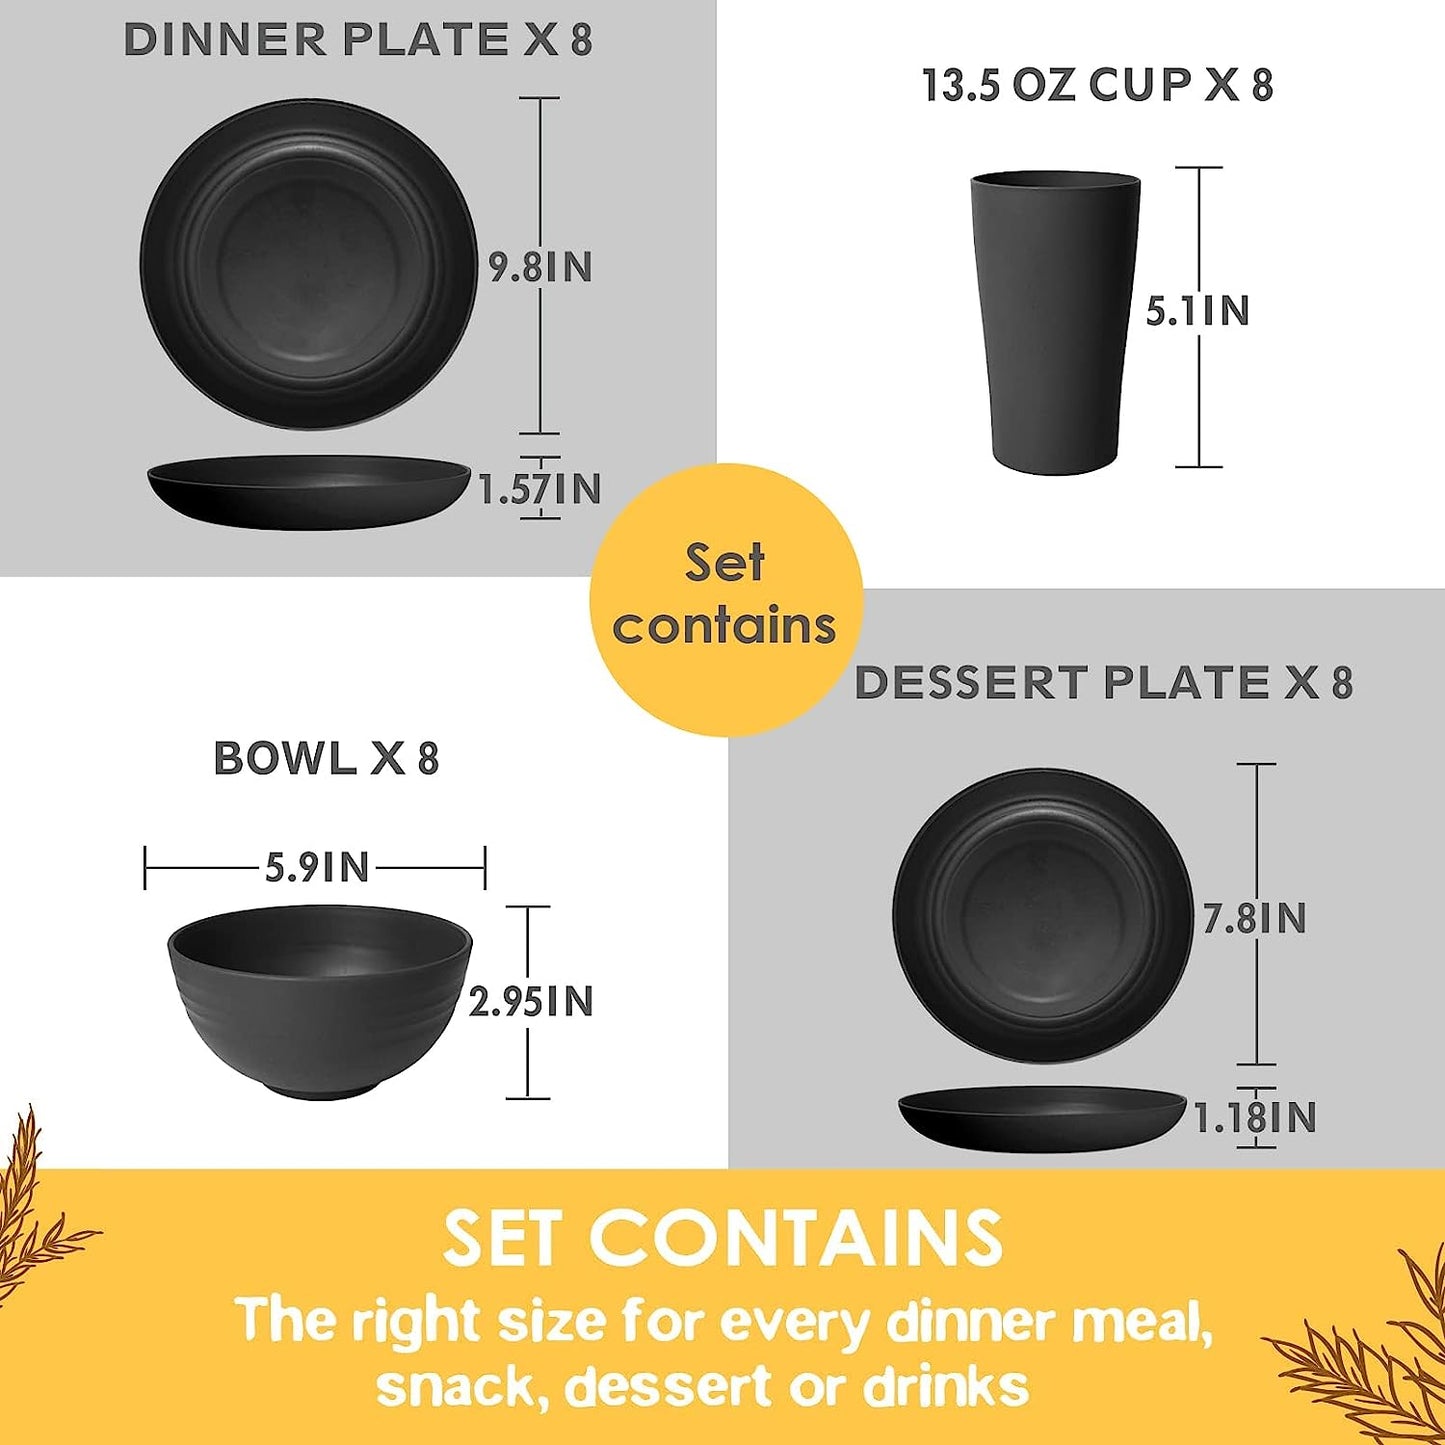 Teivio 32-Piece Kitchen Plastic Wheat Straw Dinnerware Set, Service for 8, Dinner Plates, Dessert Plate, Cereal Bowls, Cups, Unbreakable Plastic Outdoor Camping Dishes, Black